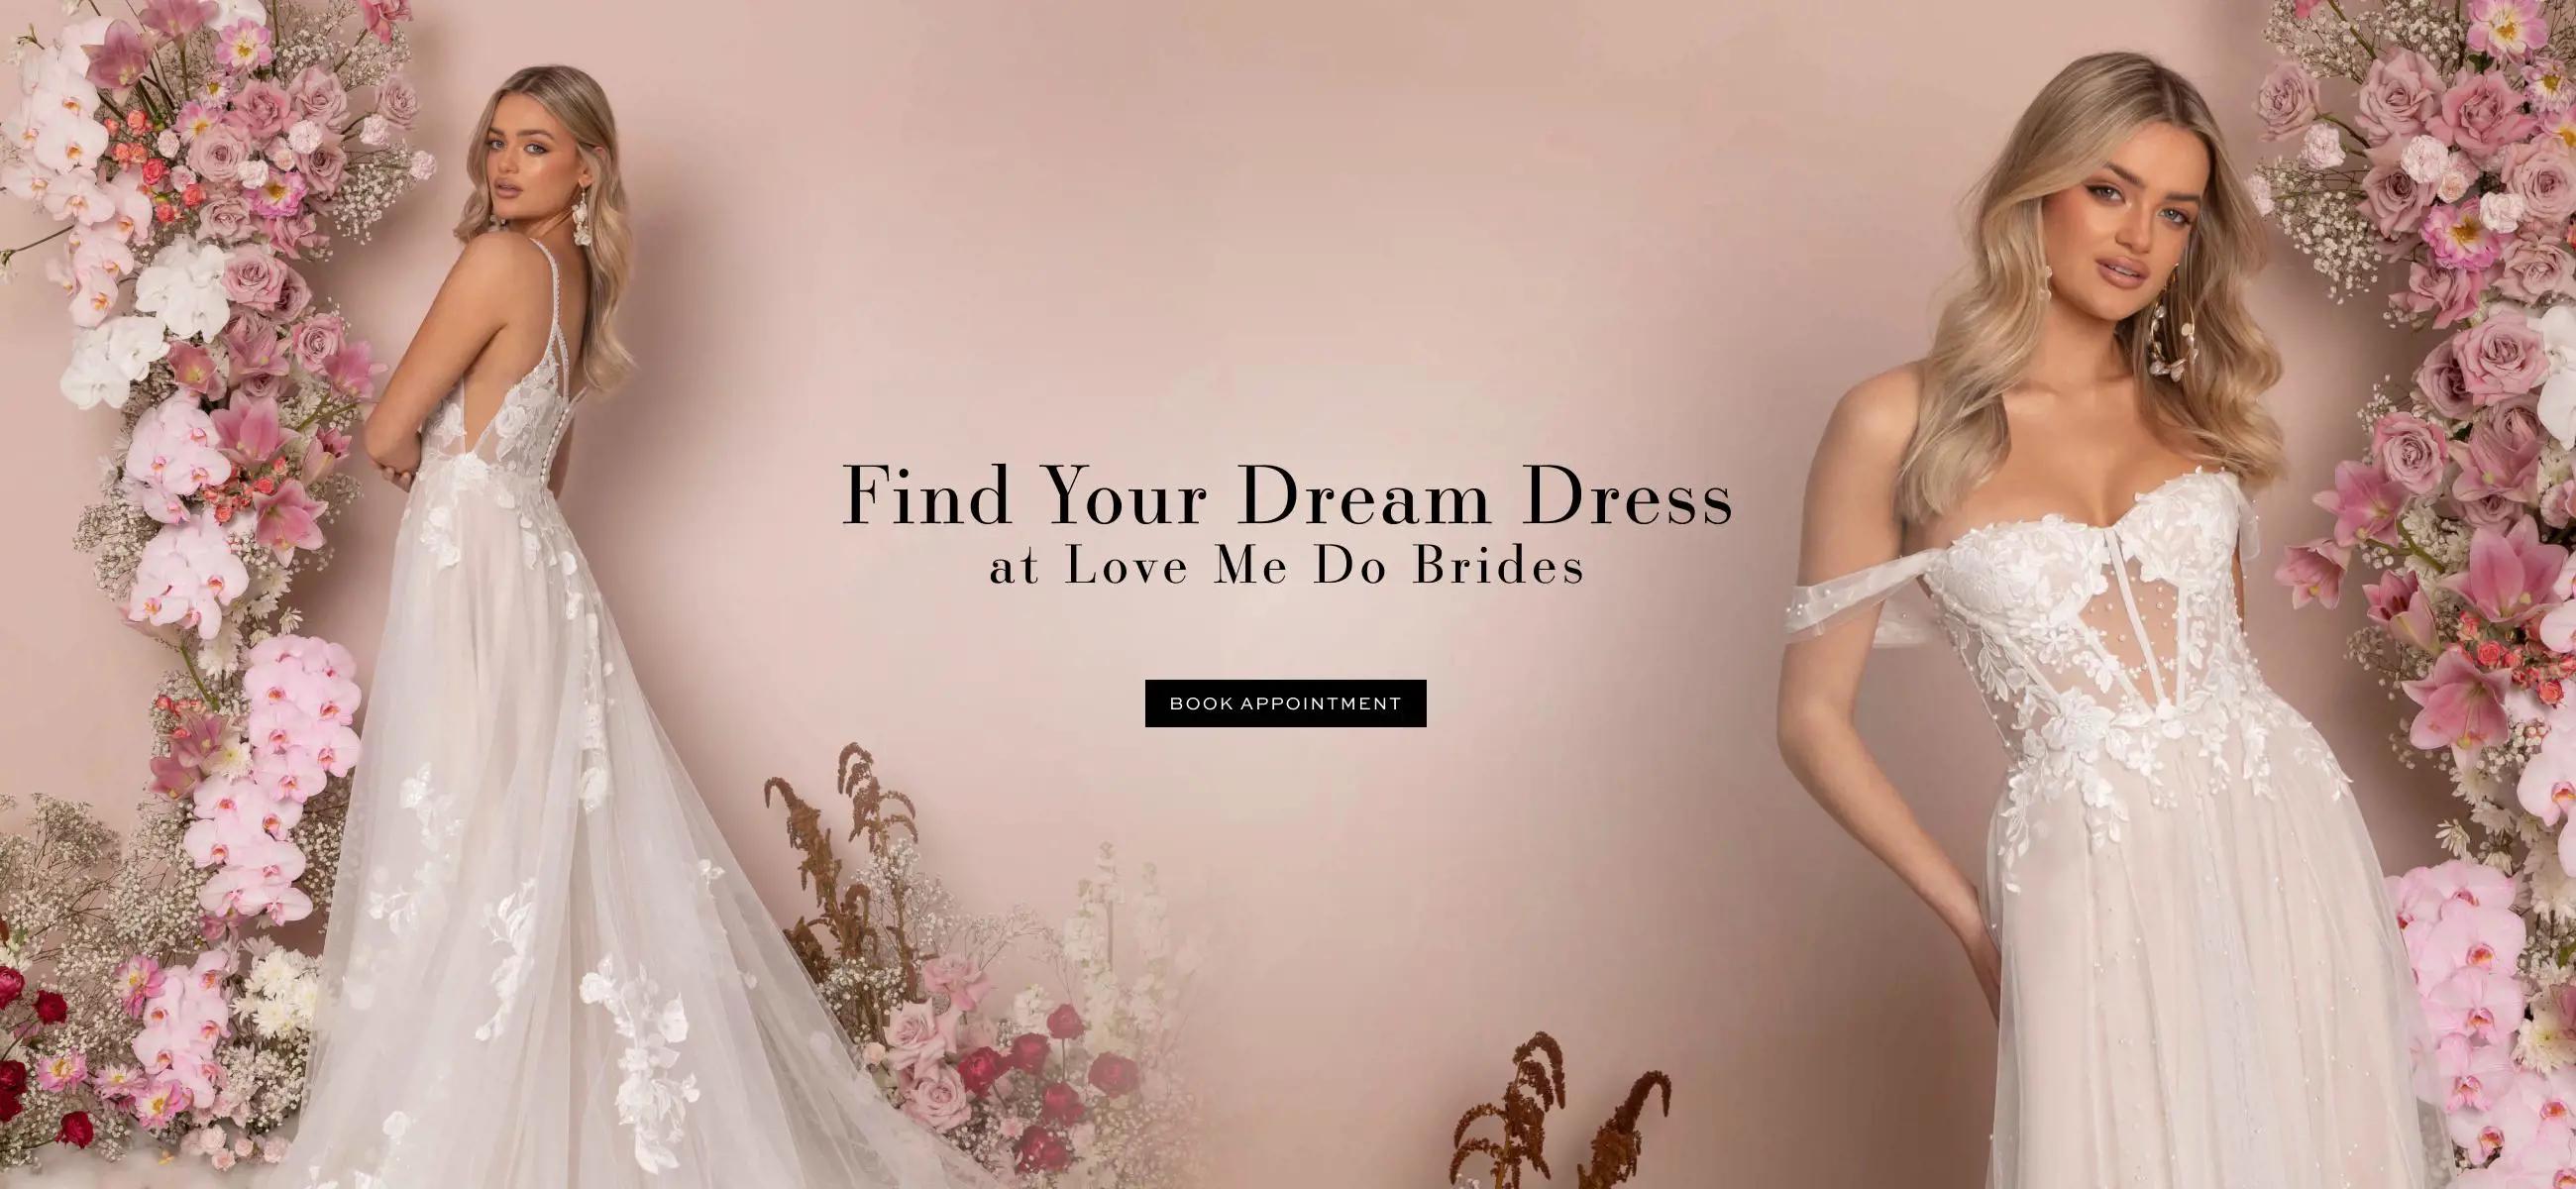 Desktop banner of model wearing bridal gown. Text reading "Find your dream dress at Love Me Do Brides". Linking to appointments page